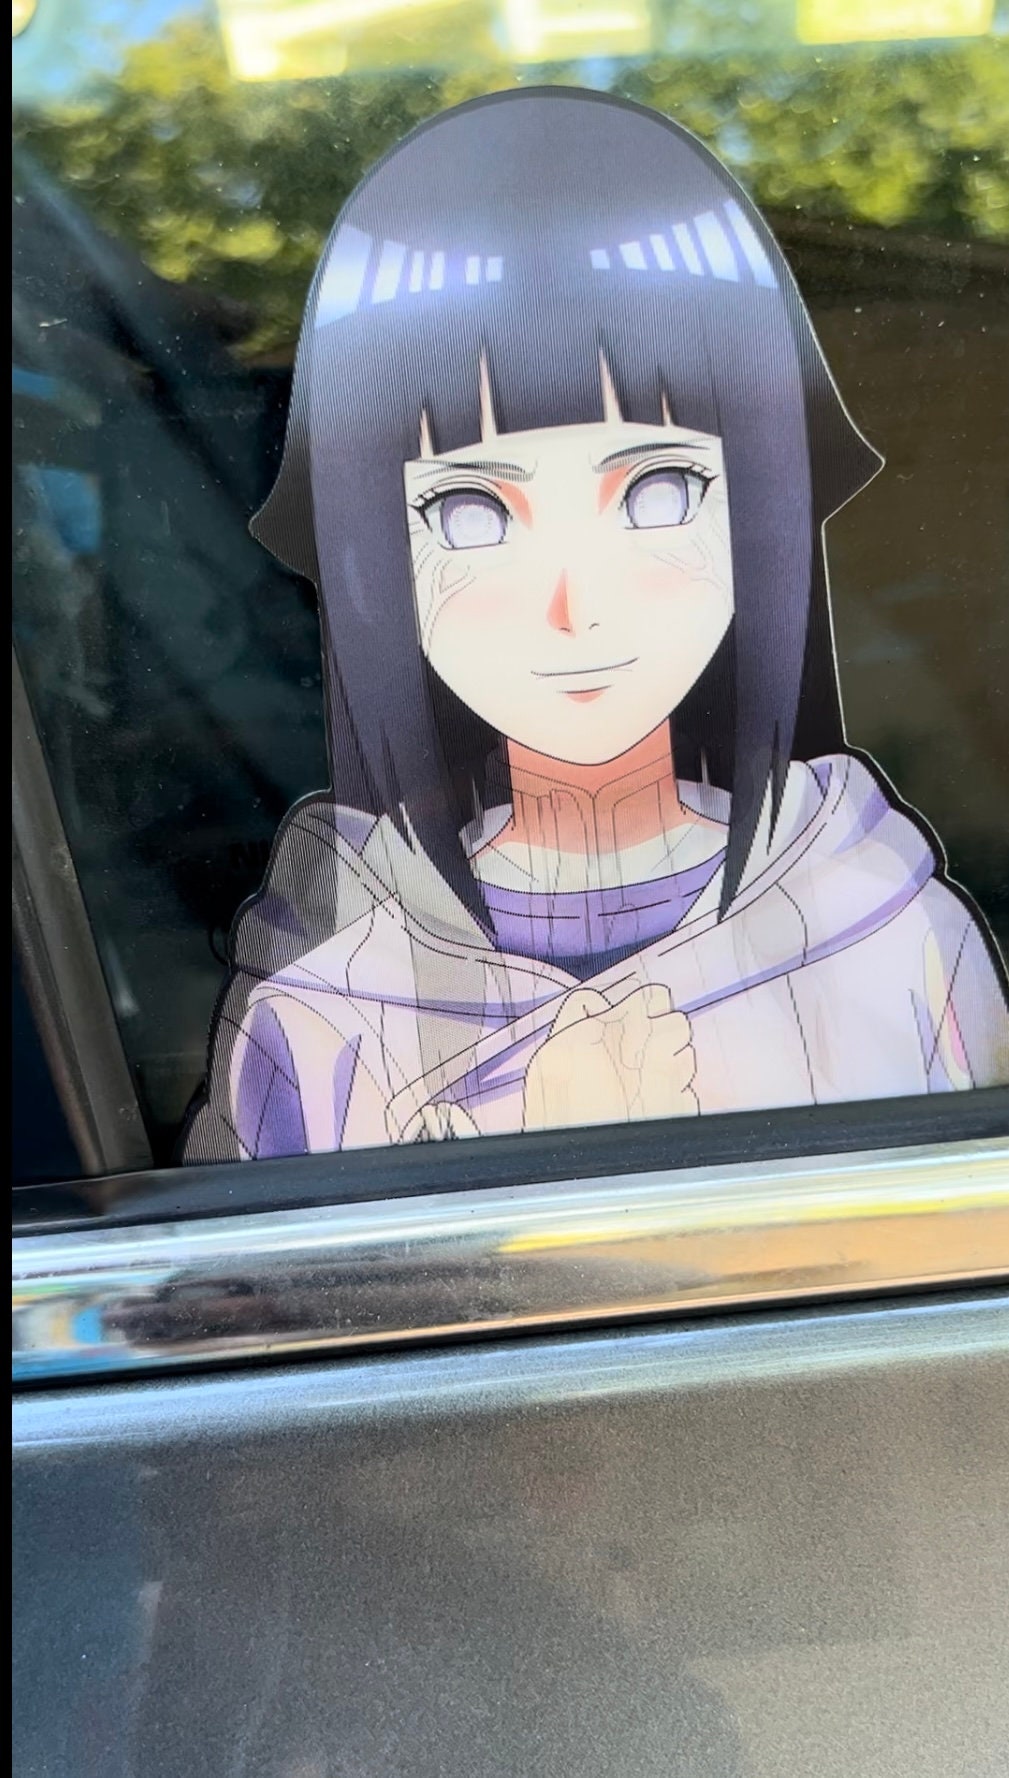 Anime NARUTO Hinata Hyuga 3D Motion Stickers Car Sticker Notebook  Waterproof Decal Toy Wall Sticker Kids Toys